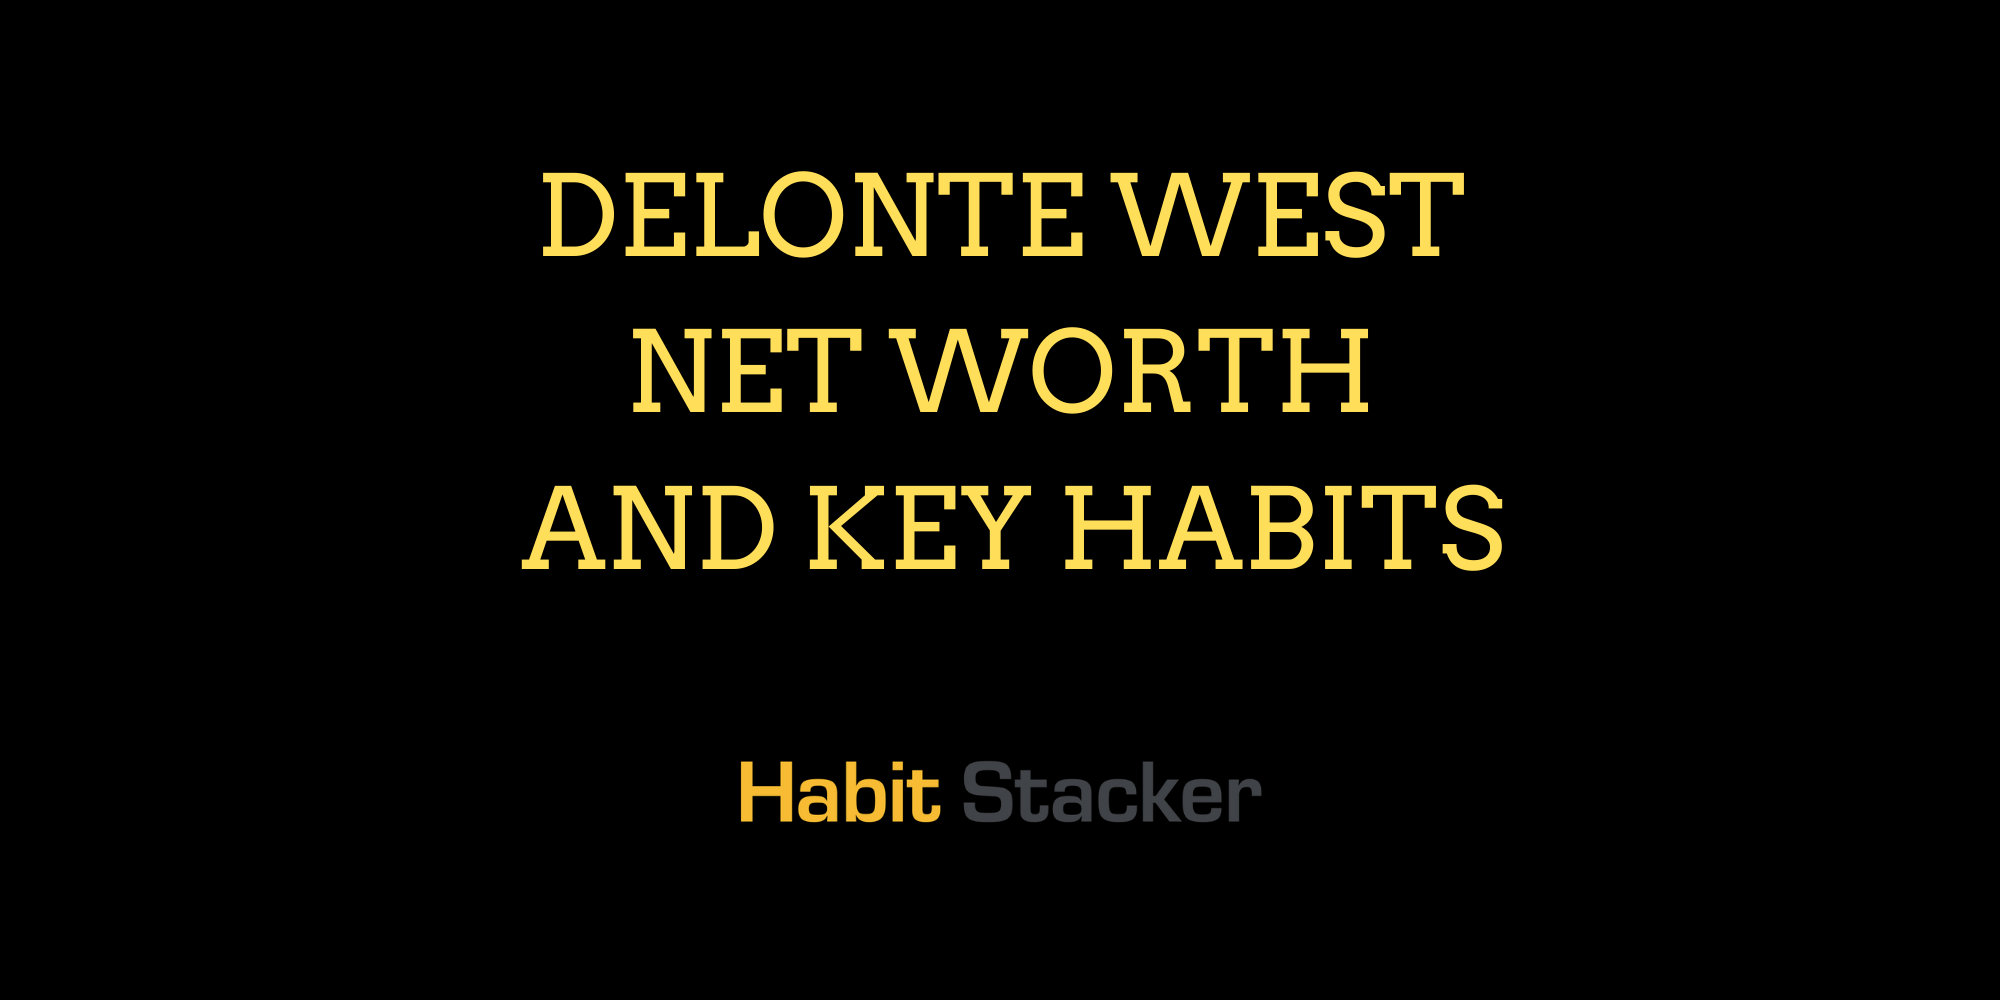 Delonte West Net Worth and Key Habits